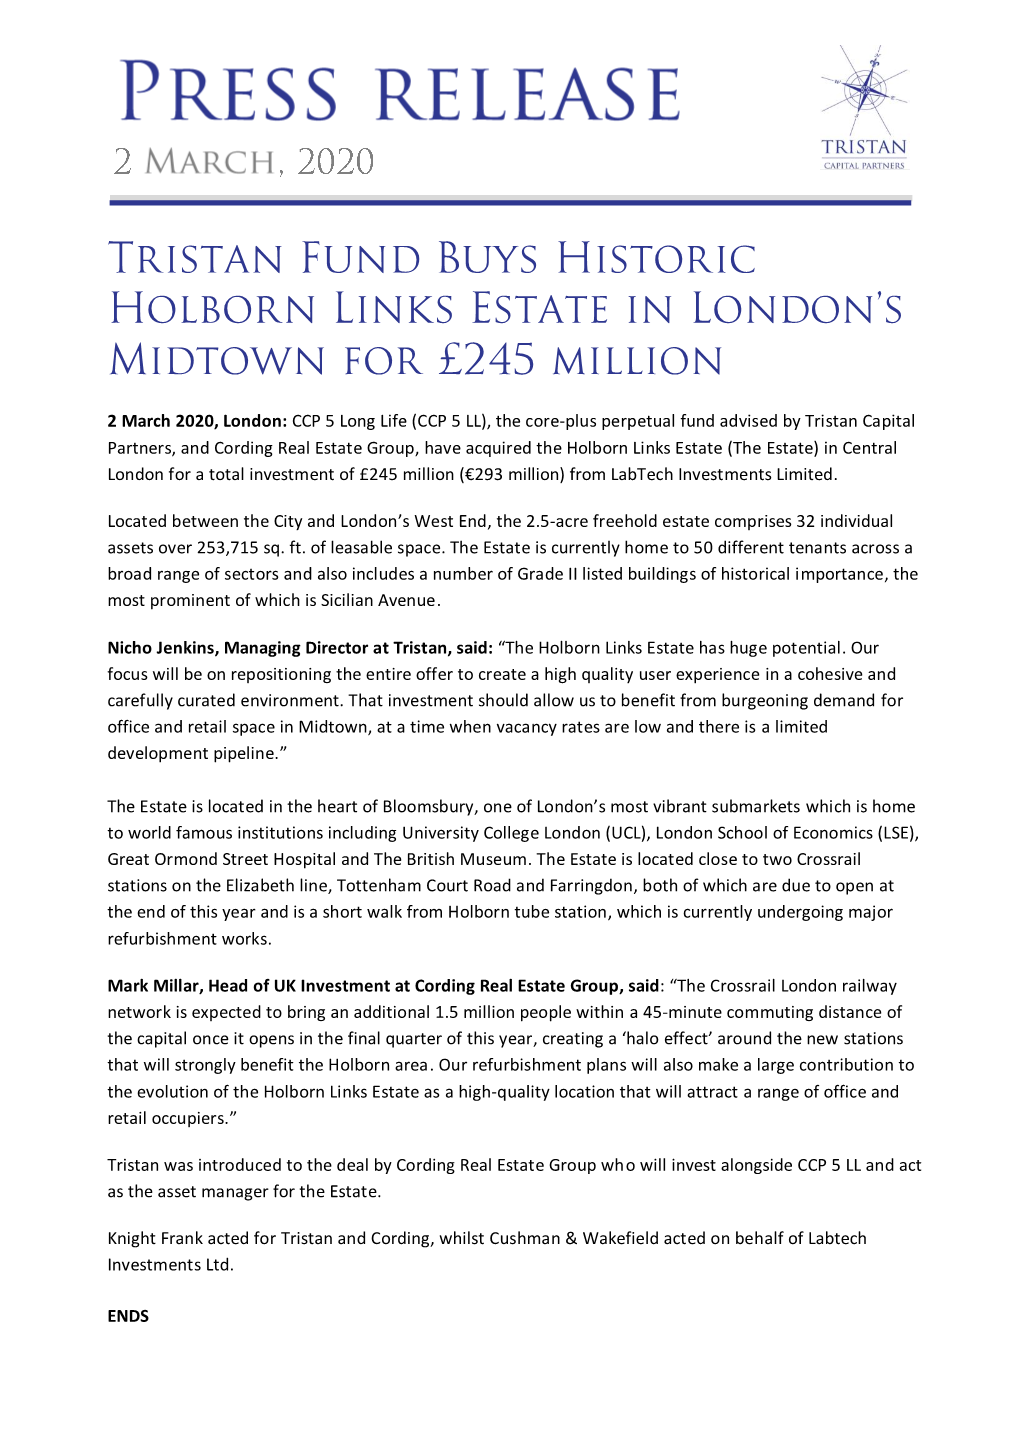 Tristan Fund Buys Historic Holborn Links Estate in London's Midtown for £245 Million